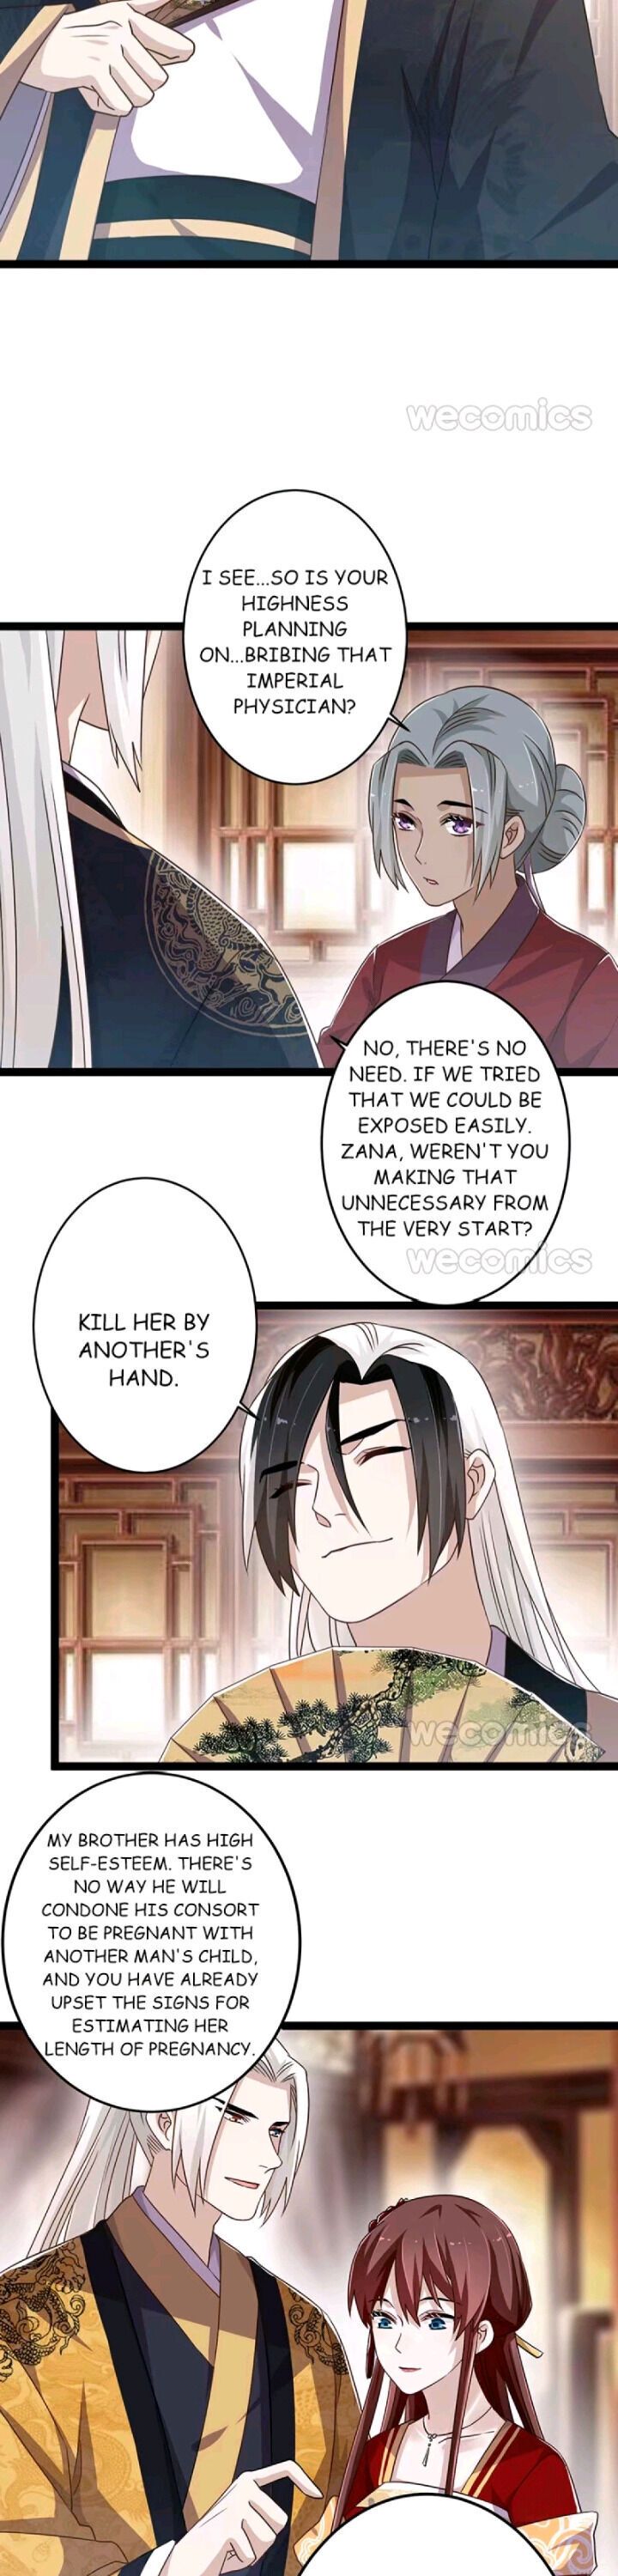 Curse of Loulan: The Tyrant Bestows Favor on Me Chapter 92 page 3